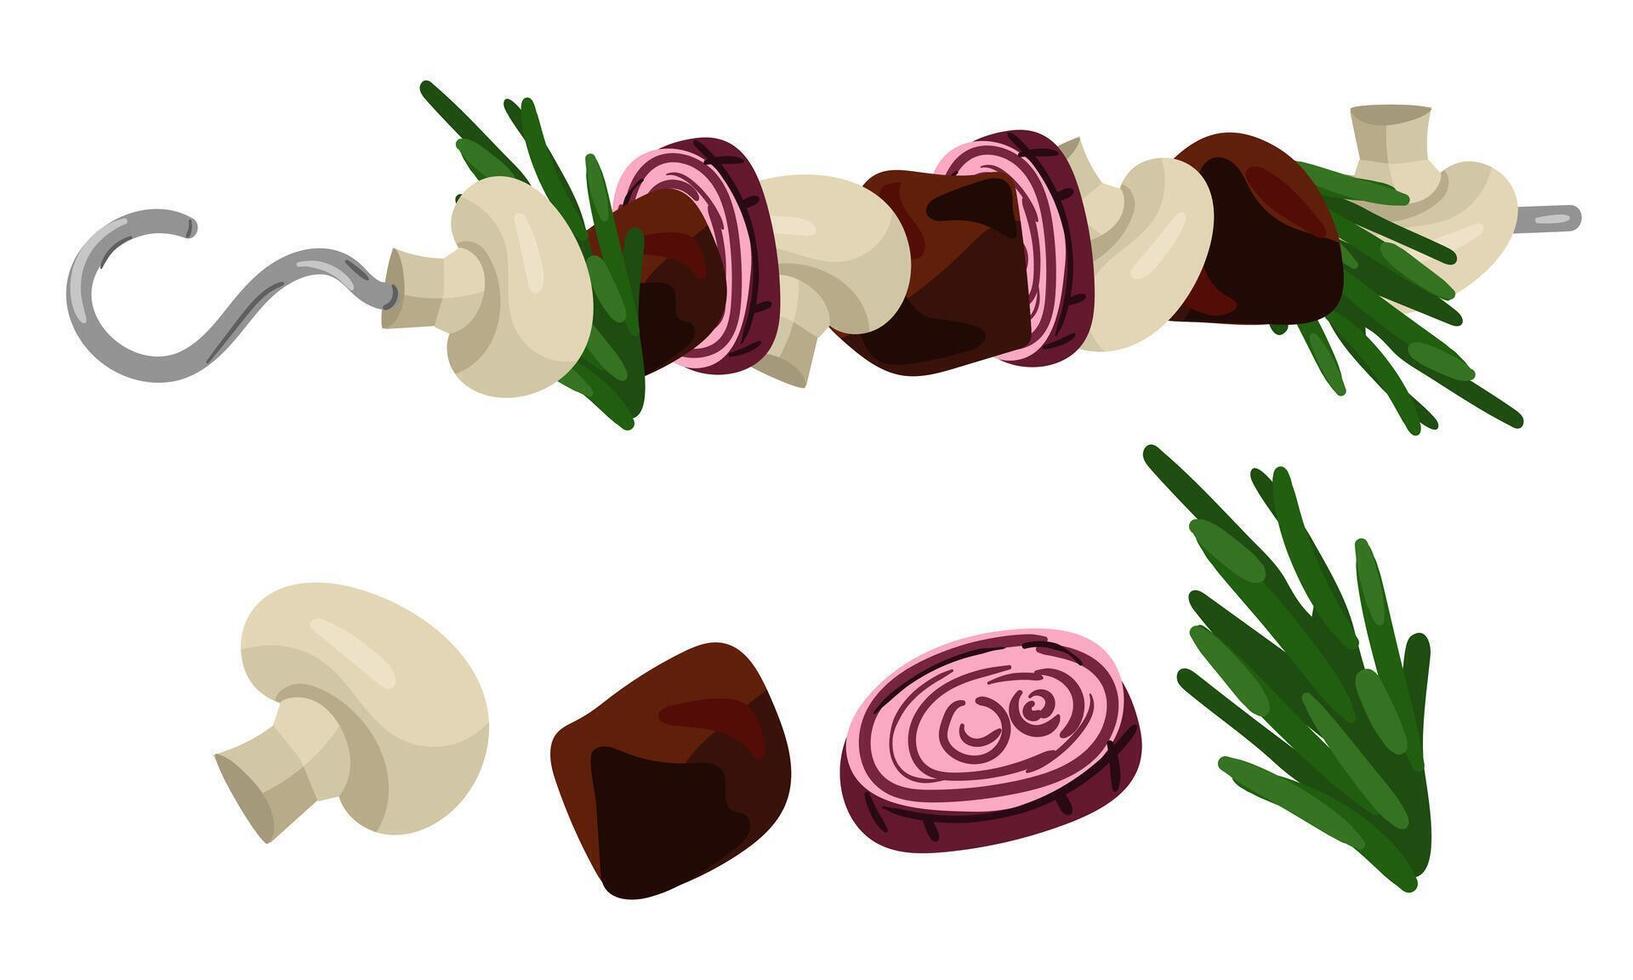 Grilled pieces of meat with herbs, onions, mushrooms strung on a skewer and separately. Independent juicy ready-made meat dish made of pork or beef. Ready-made dish for the restaurant, menu on white vector